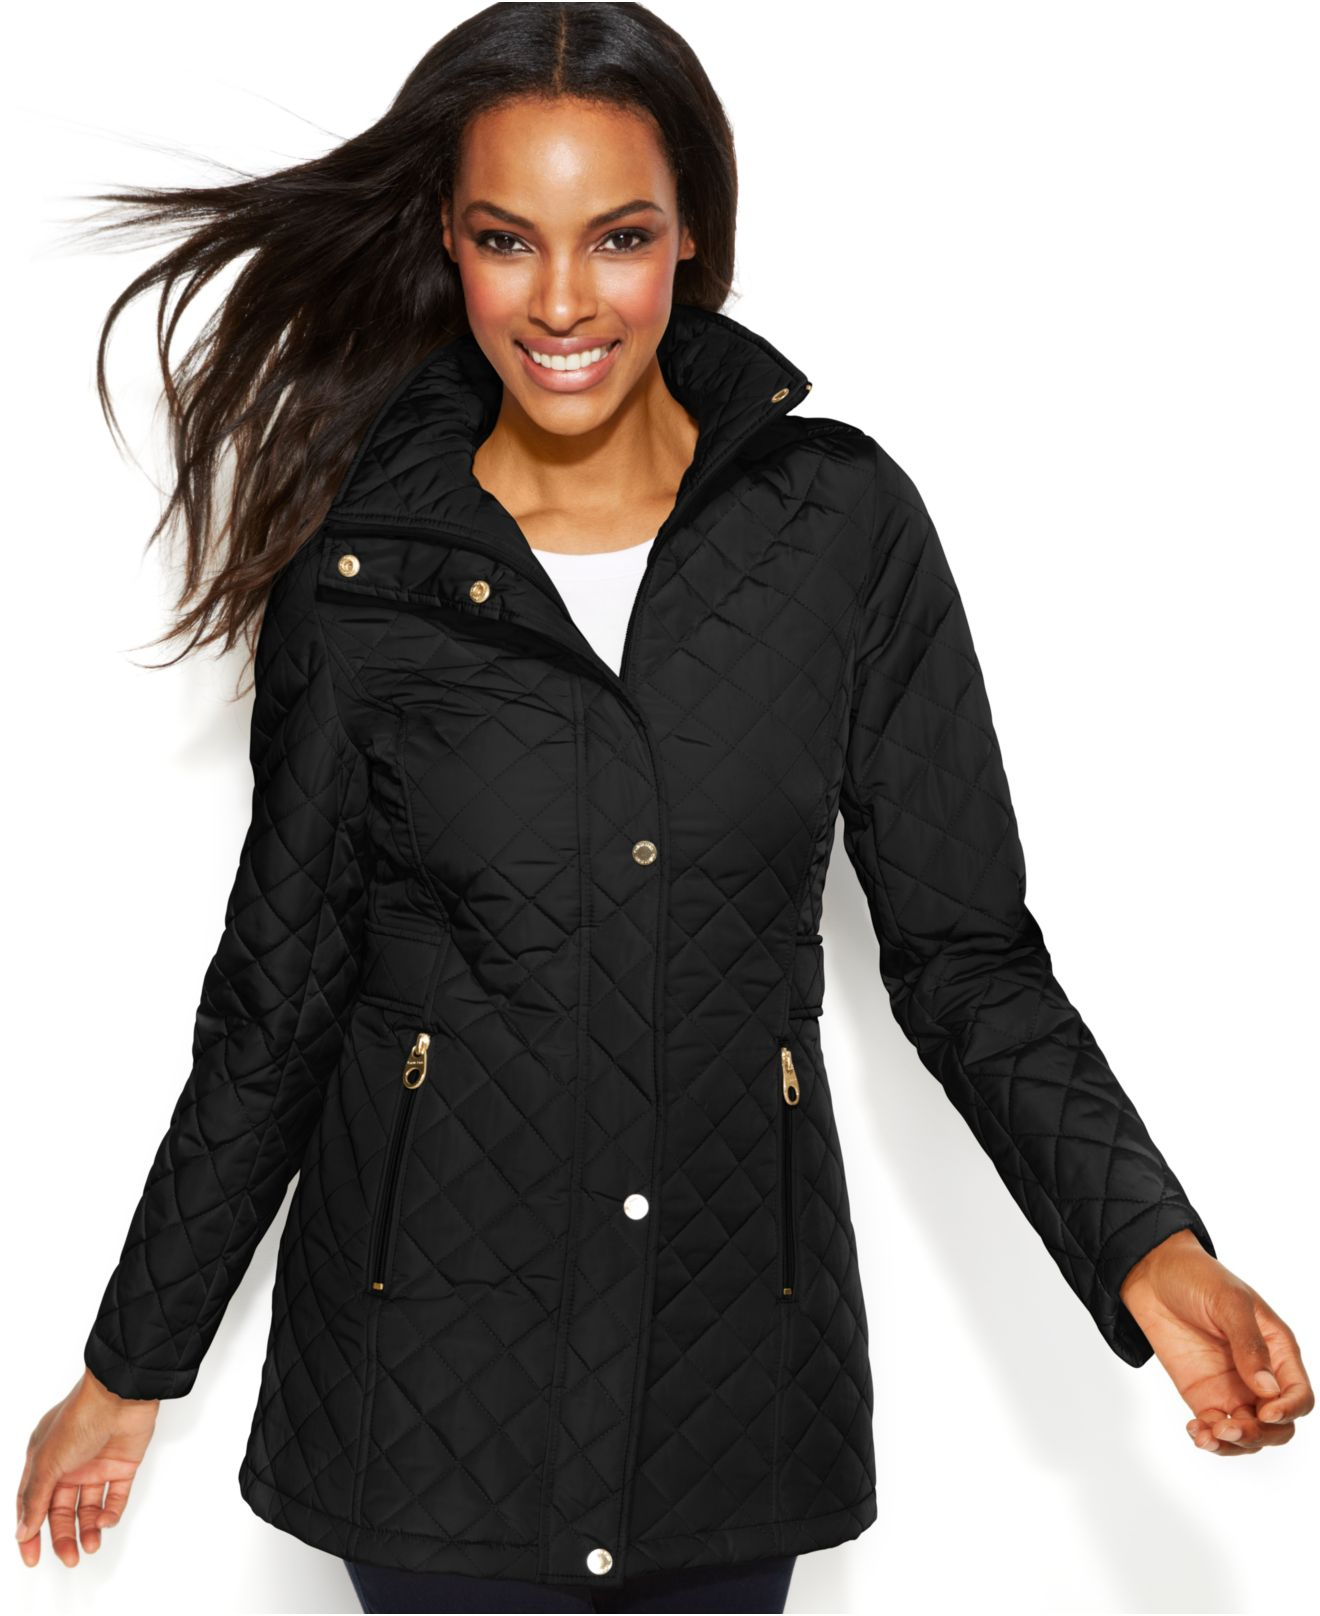 Calvin Klein Hooded Quilted Jacket in Black - Lyst